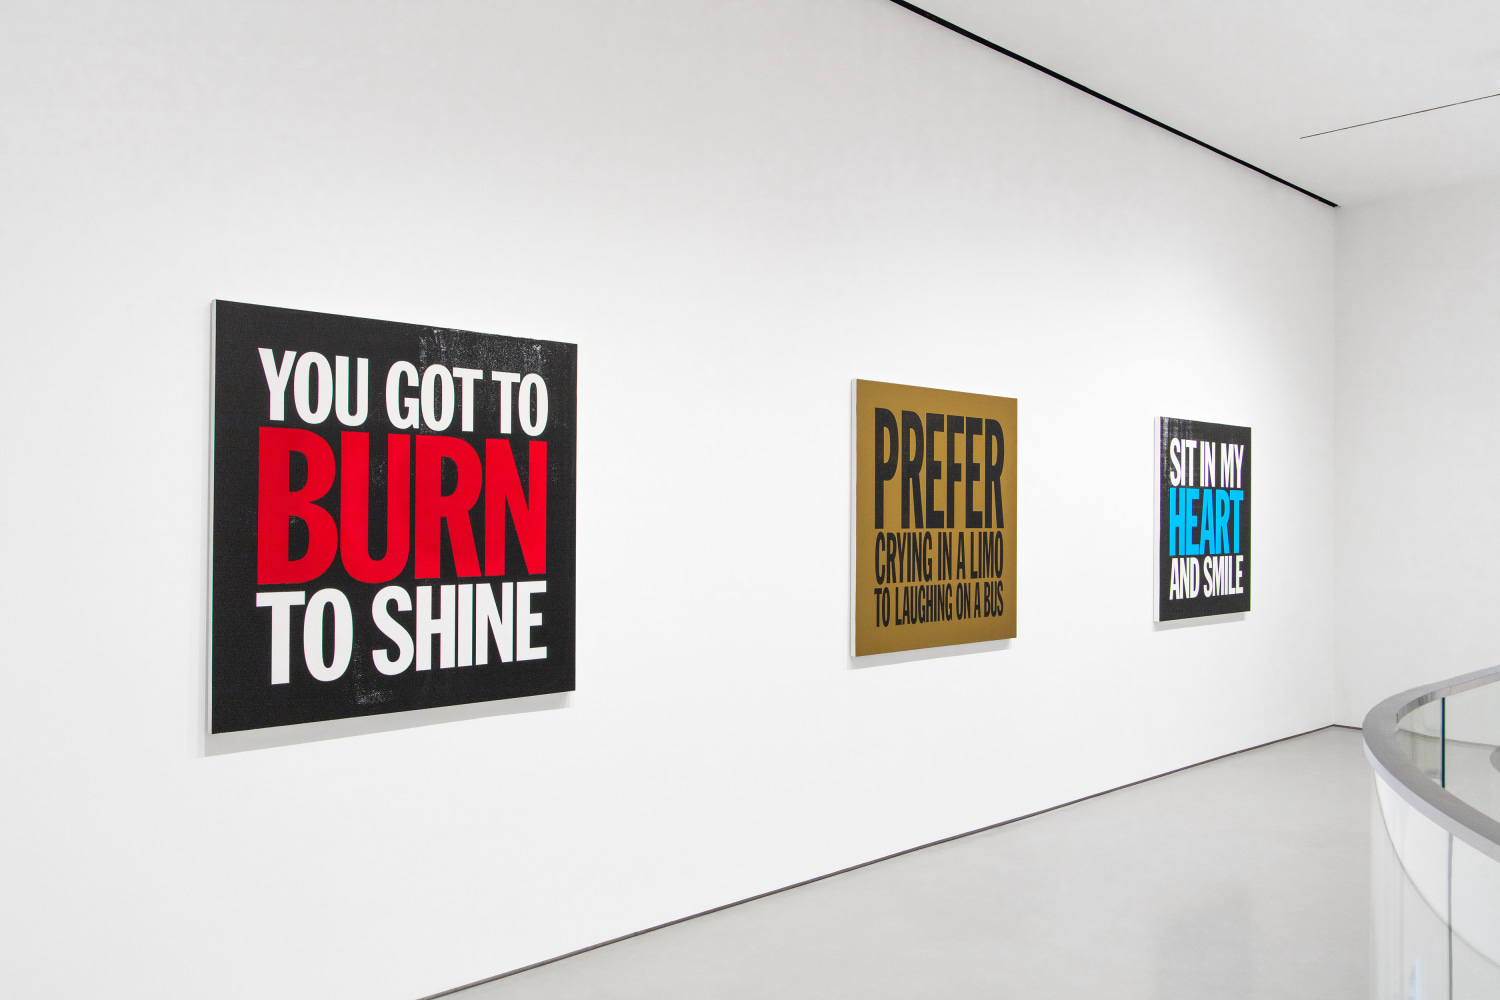 Installation view of&amp;nbsp;John Giorno&amp;nbsp;at Sperone Westwater. Image Courtesty of Sperone Westwater, New York.